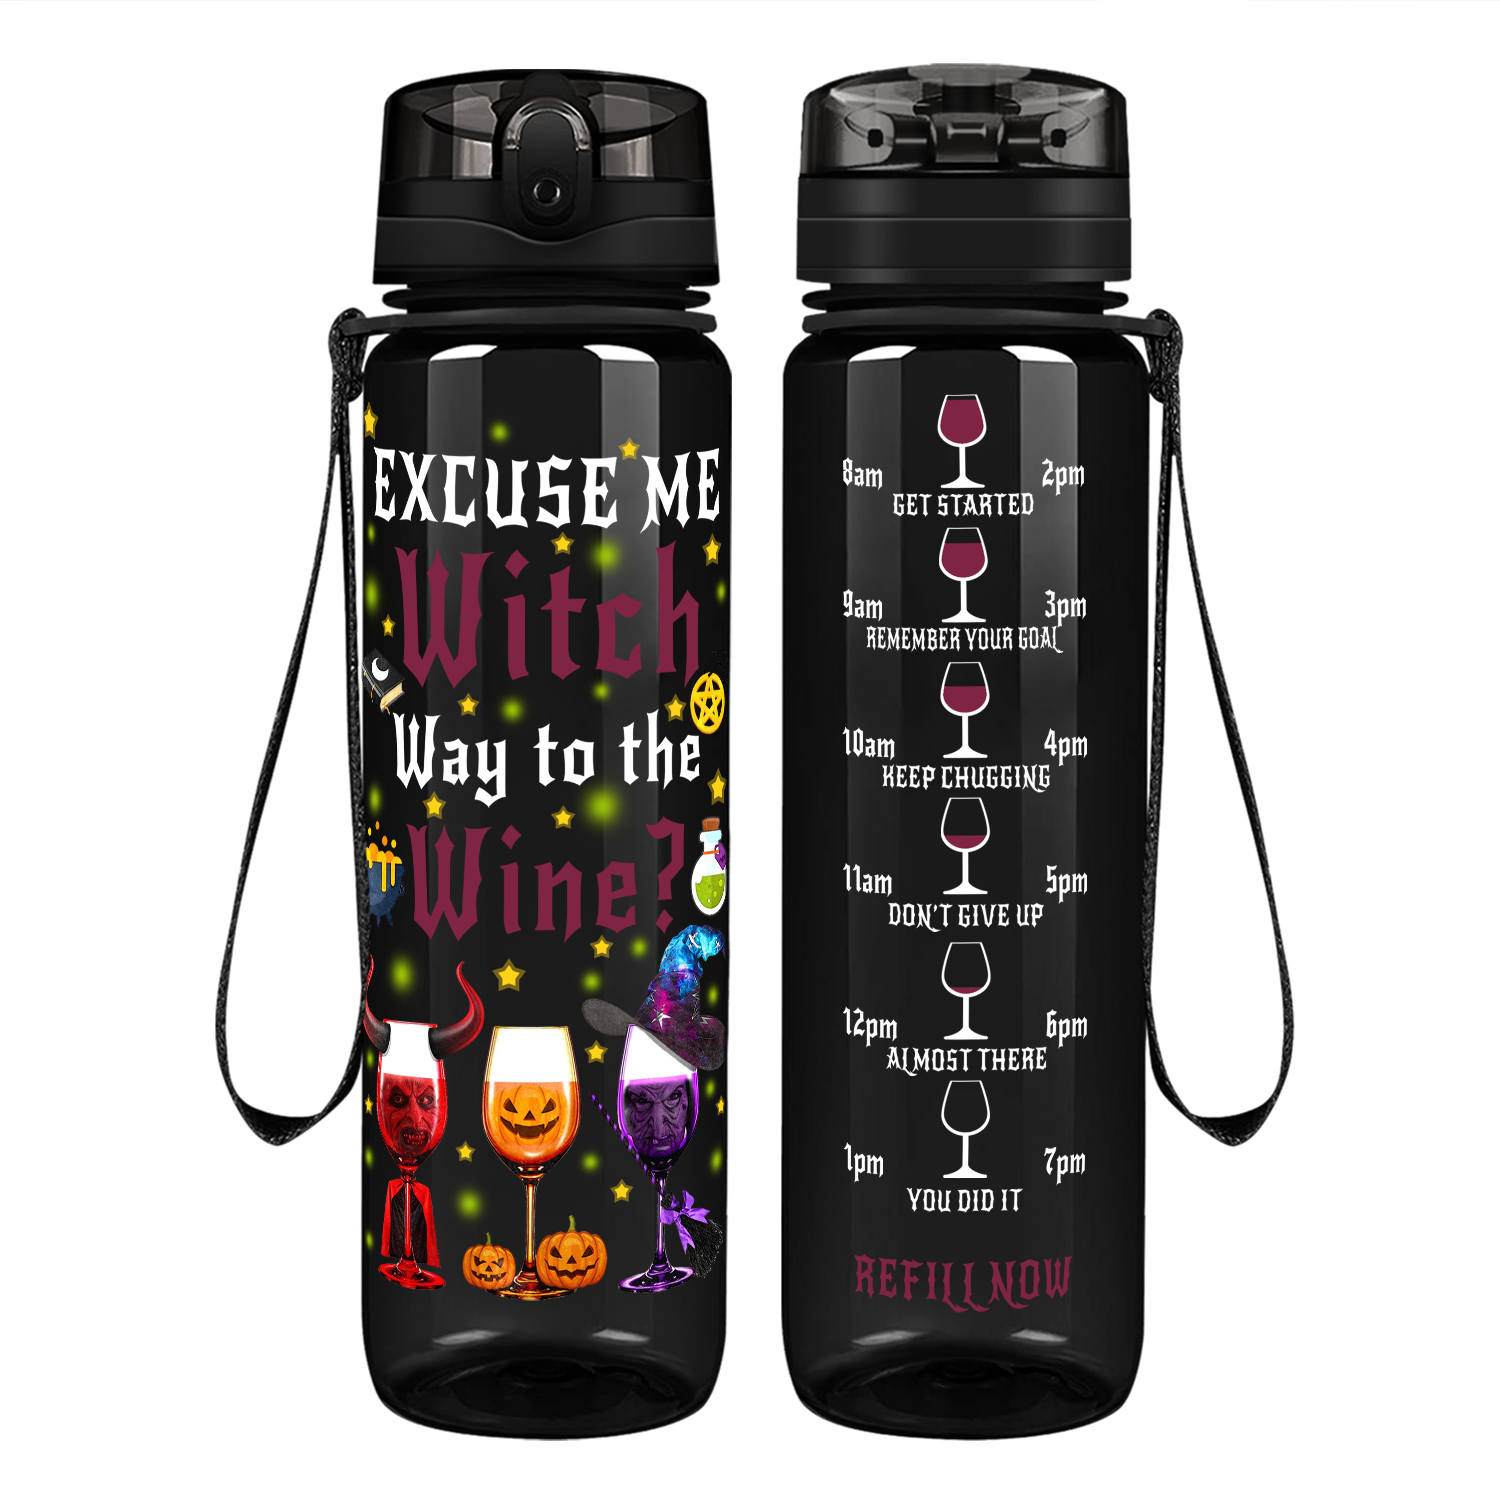 Excuse Me Witch Way to the Wine on 32 oz Motivational Tracking Water Bottle